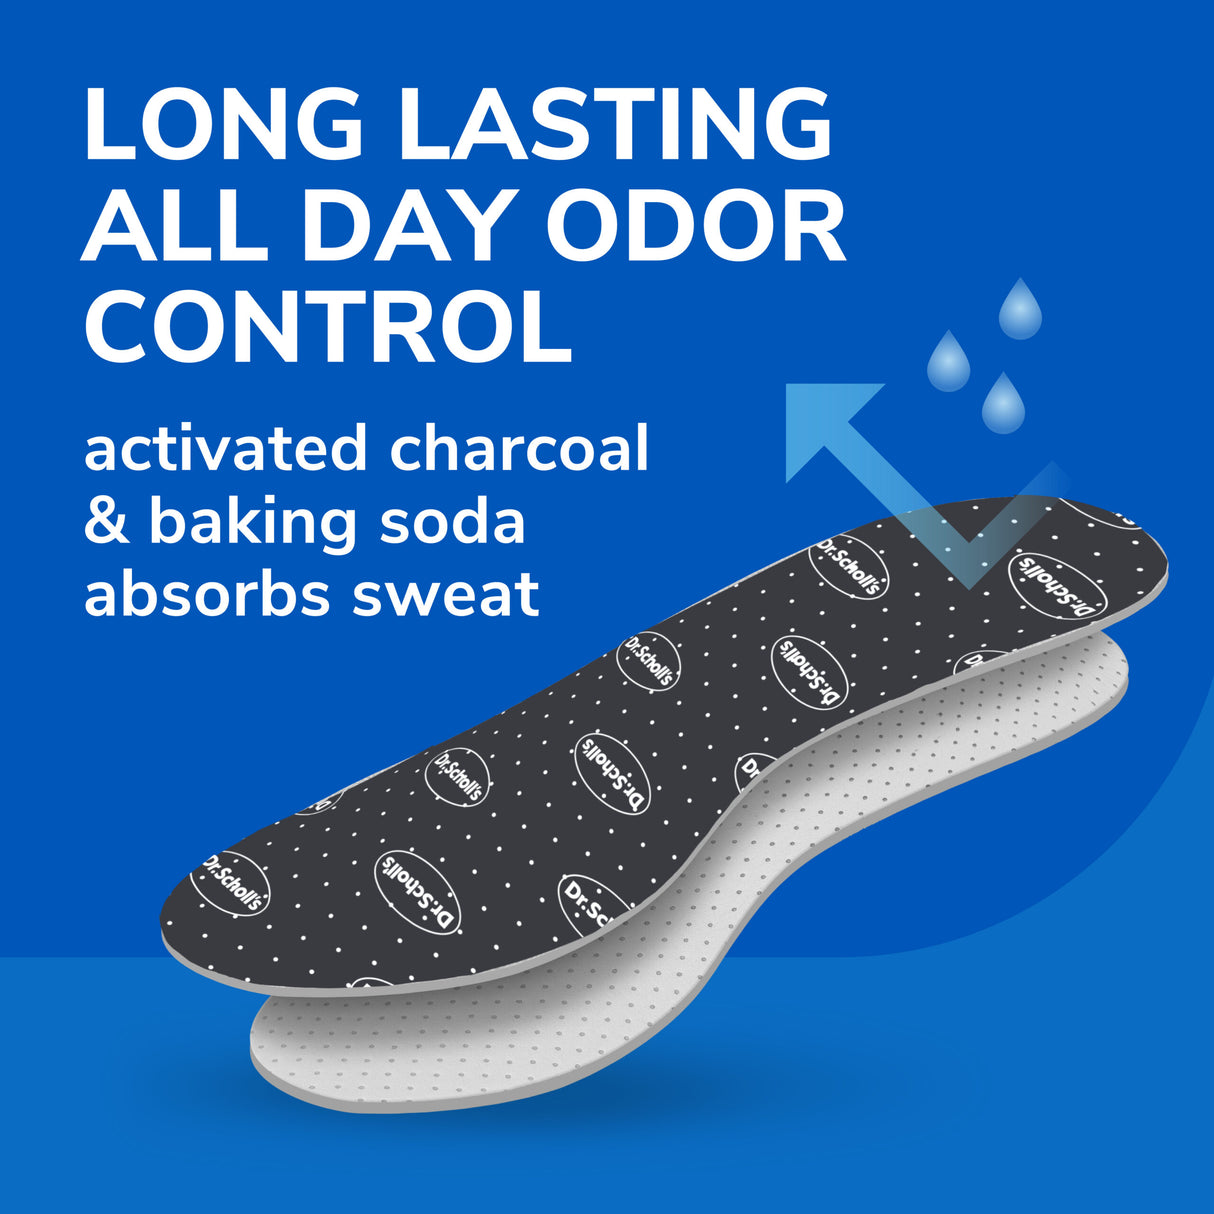 imag eof long lasting odor control activated charcoal and baking soda absorbs sweat